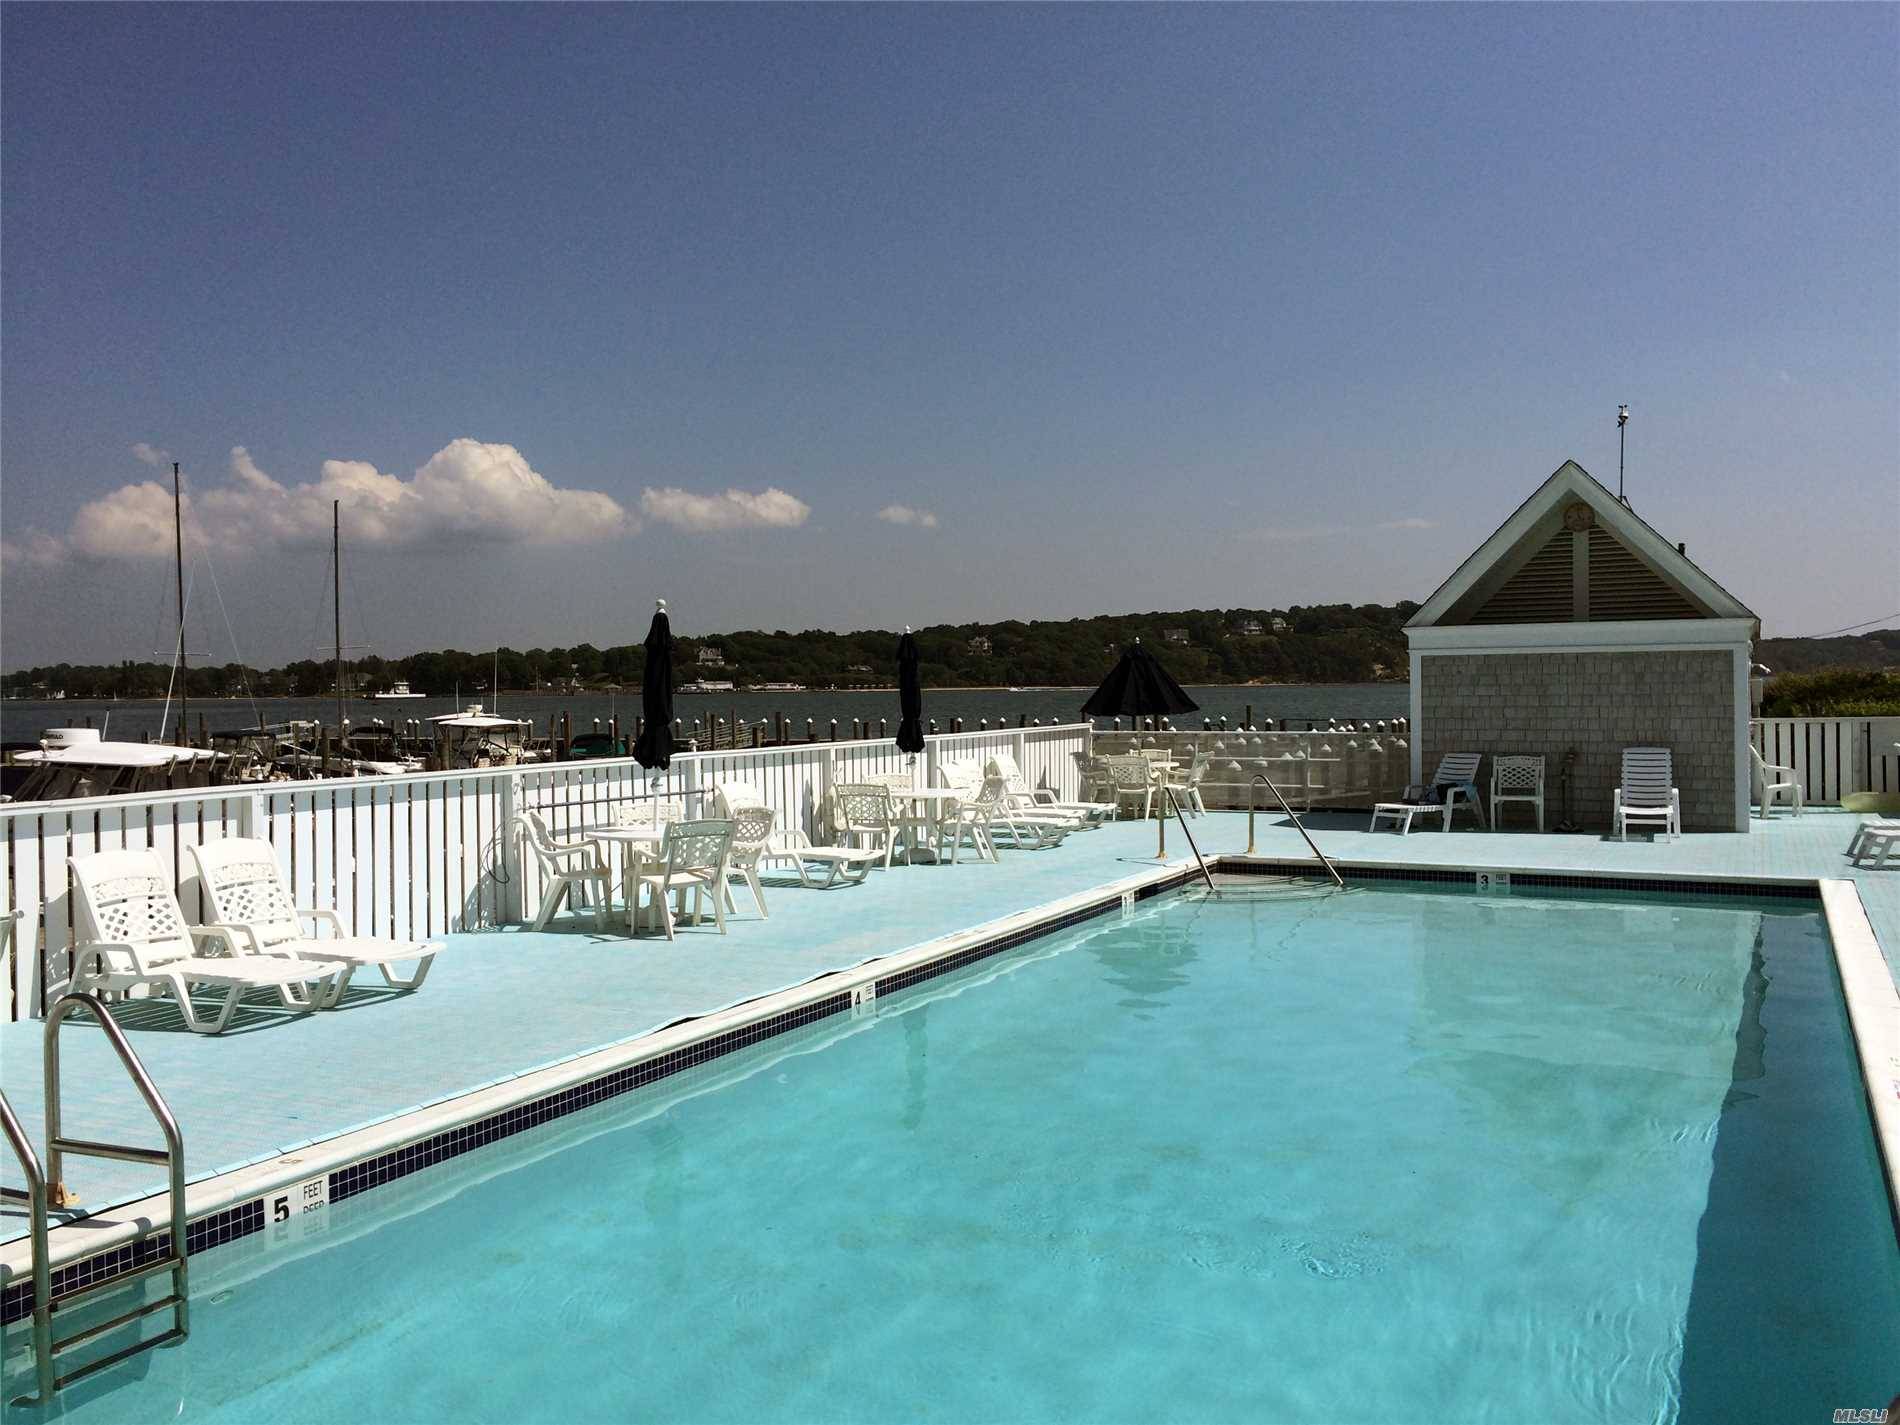 Waterfront Condo On The Bay Close To Greenport Village, Enjoy Boating, Biking, Shops And Restaurants, Pool, Tennis Courts And Boat Slip.